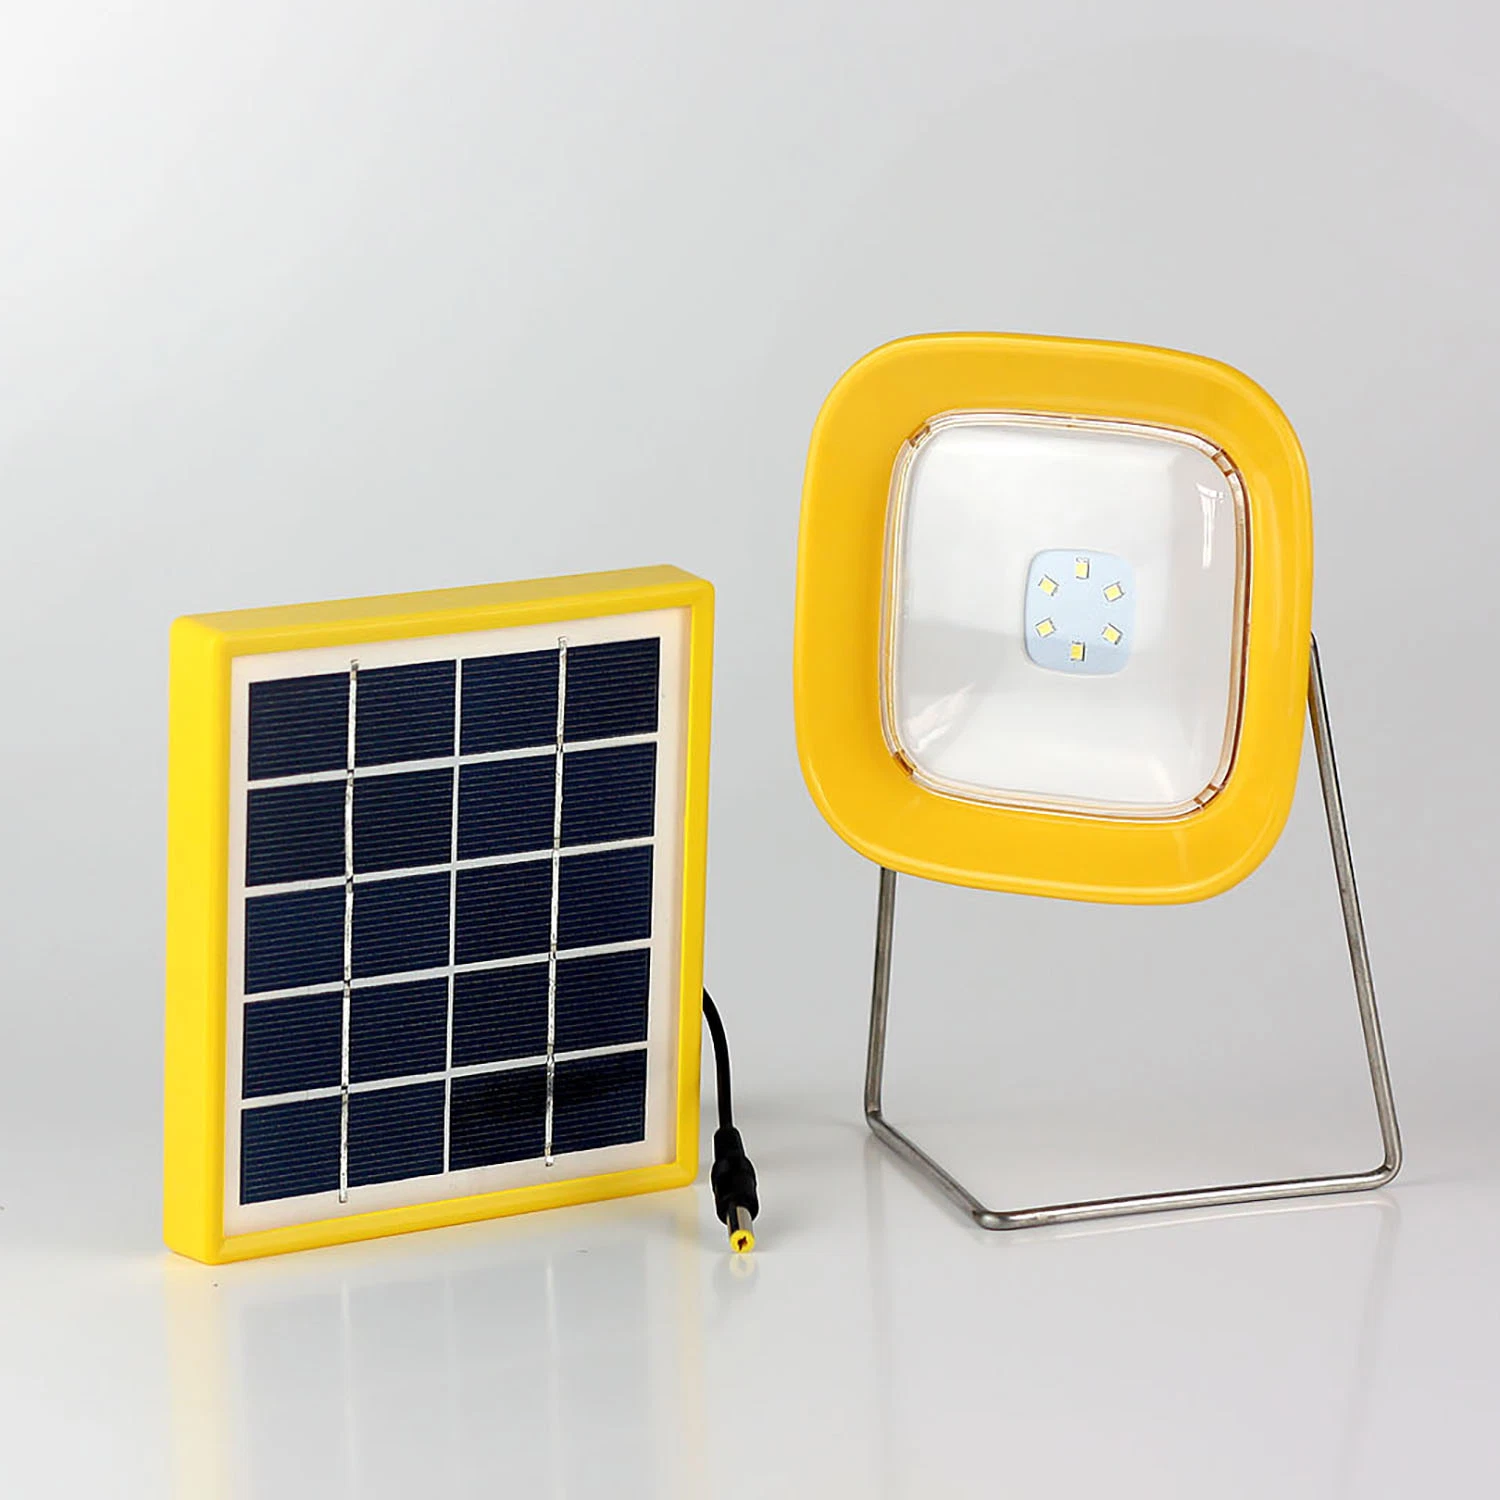 Solar Panel Lamp with USB to Charge Mobile Phone Study Light